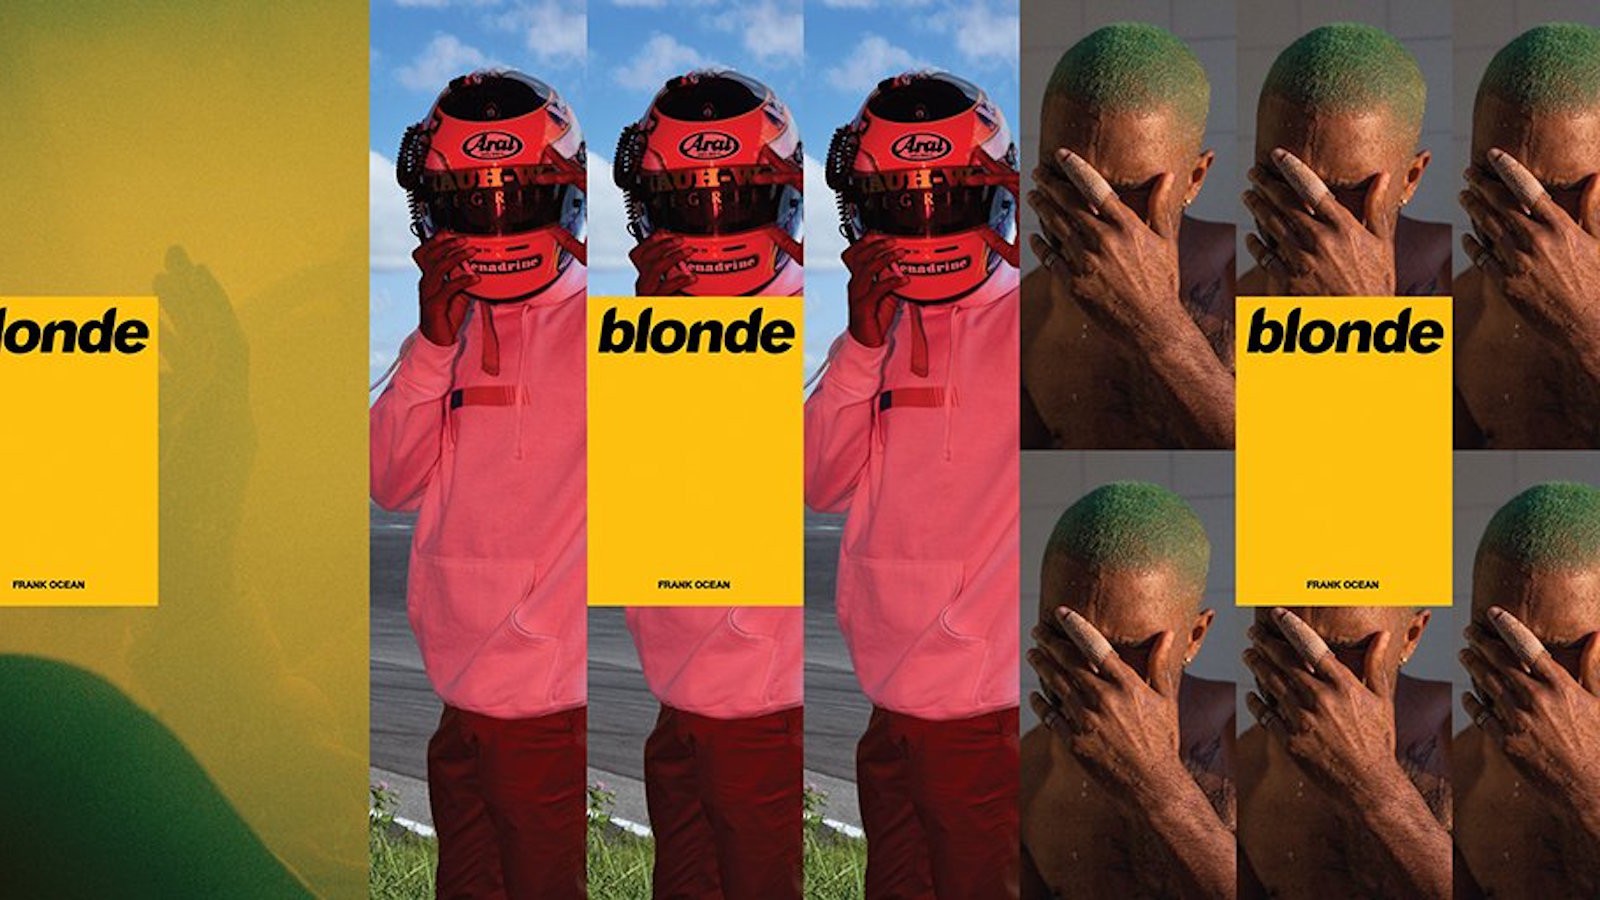 Blond Album Cover Hd Wallpapers